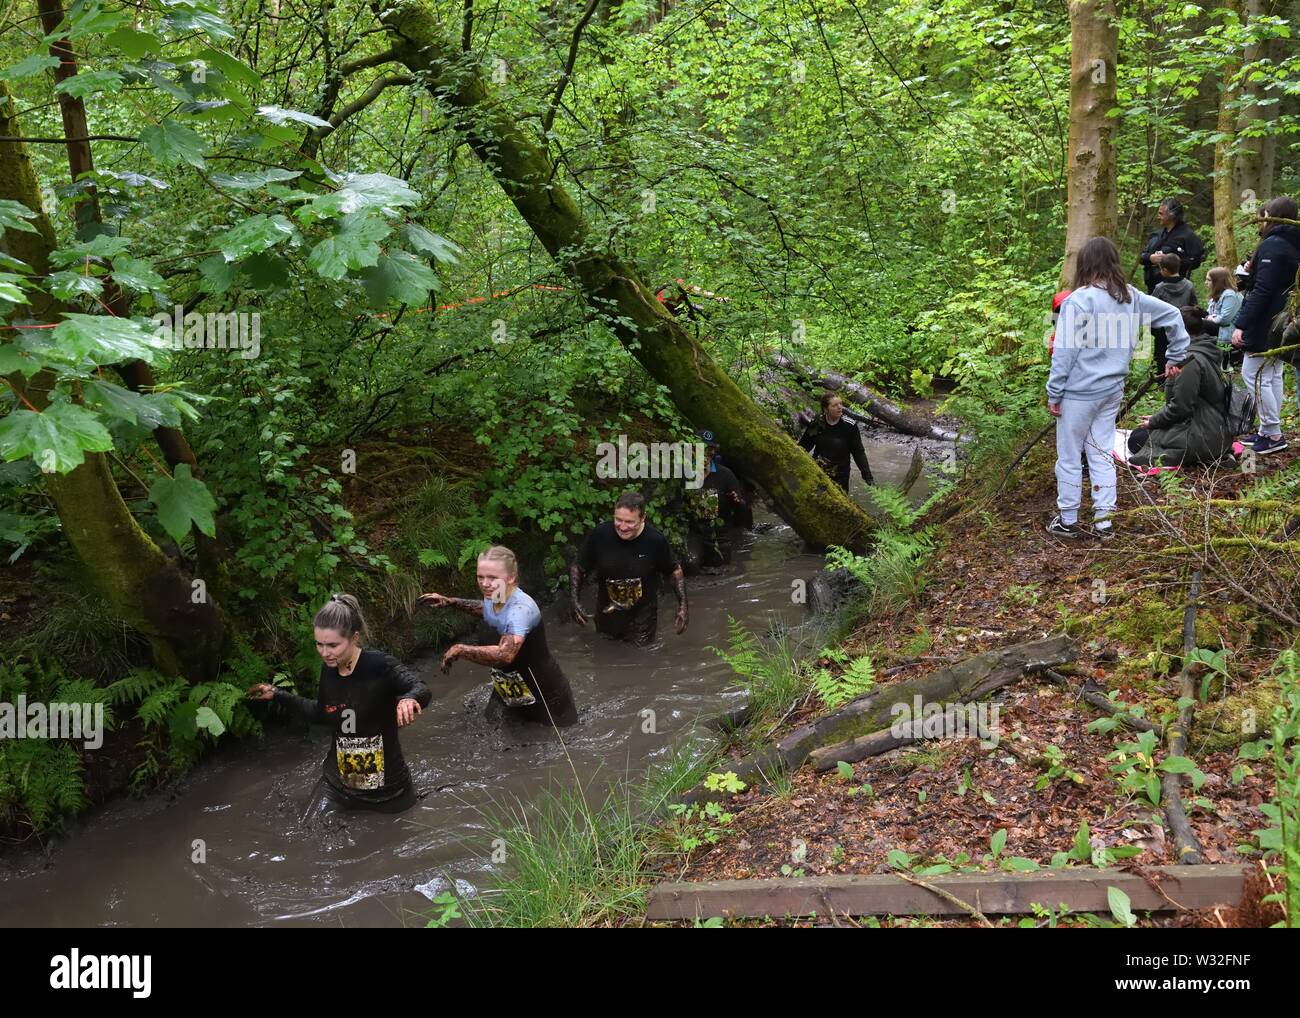 Participant runners in the 'Muddy Trial' races wading through a water filled ditch on the Craufurdland Estate, Kilmarnock, Scotland, UK Stock Photo